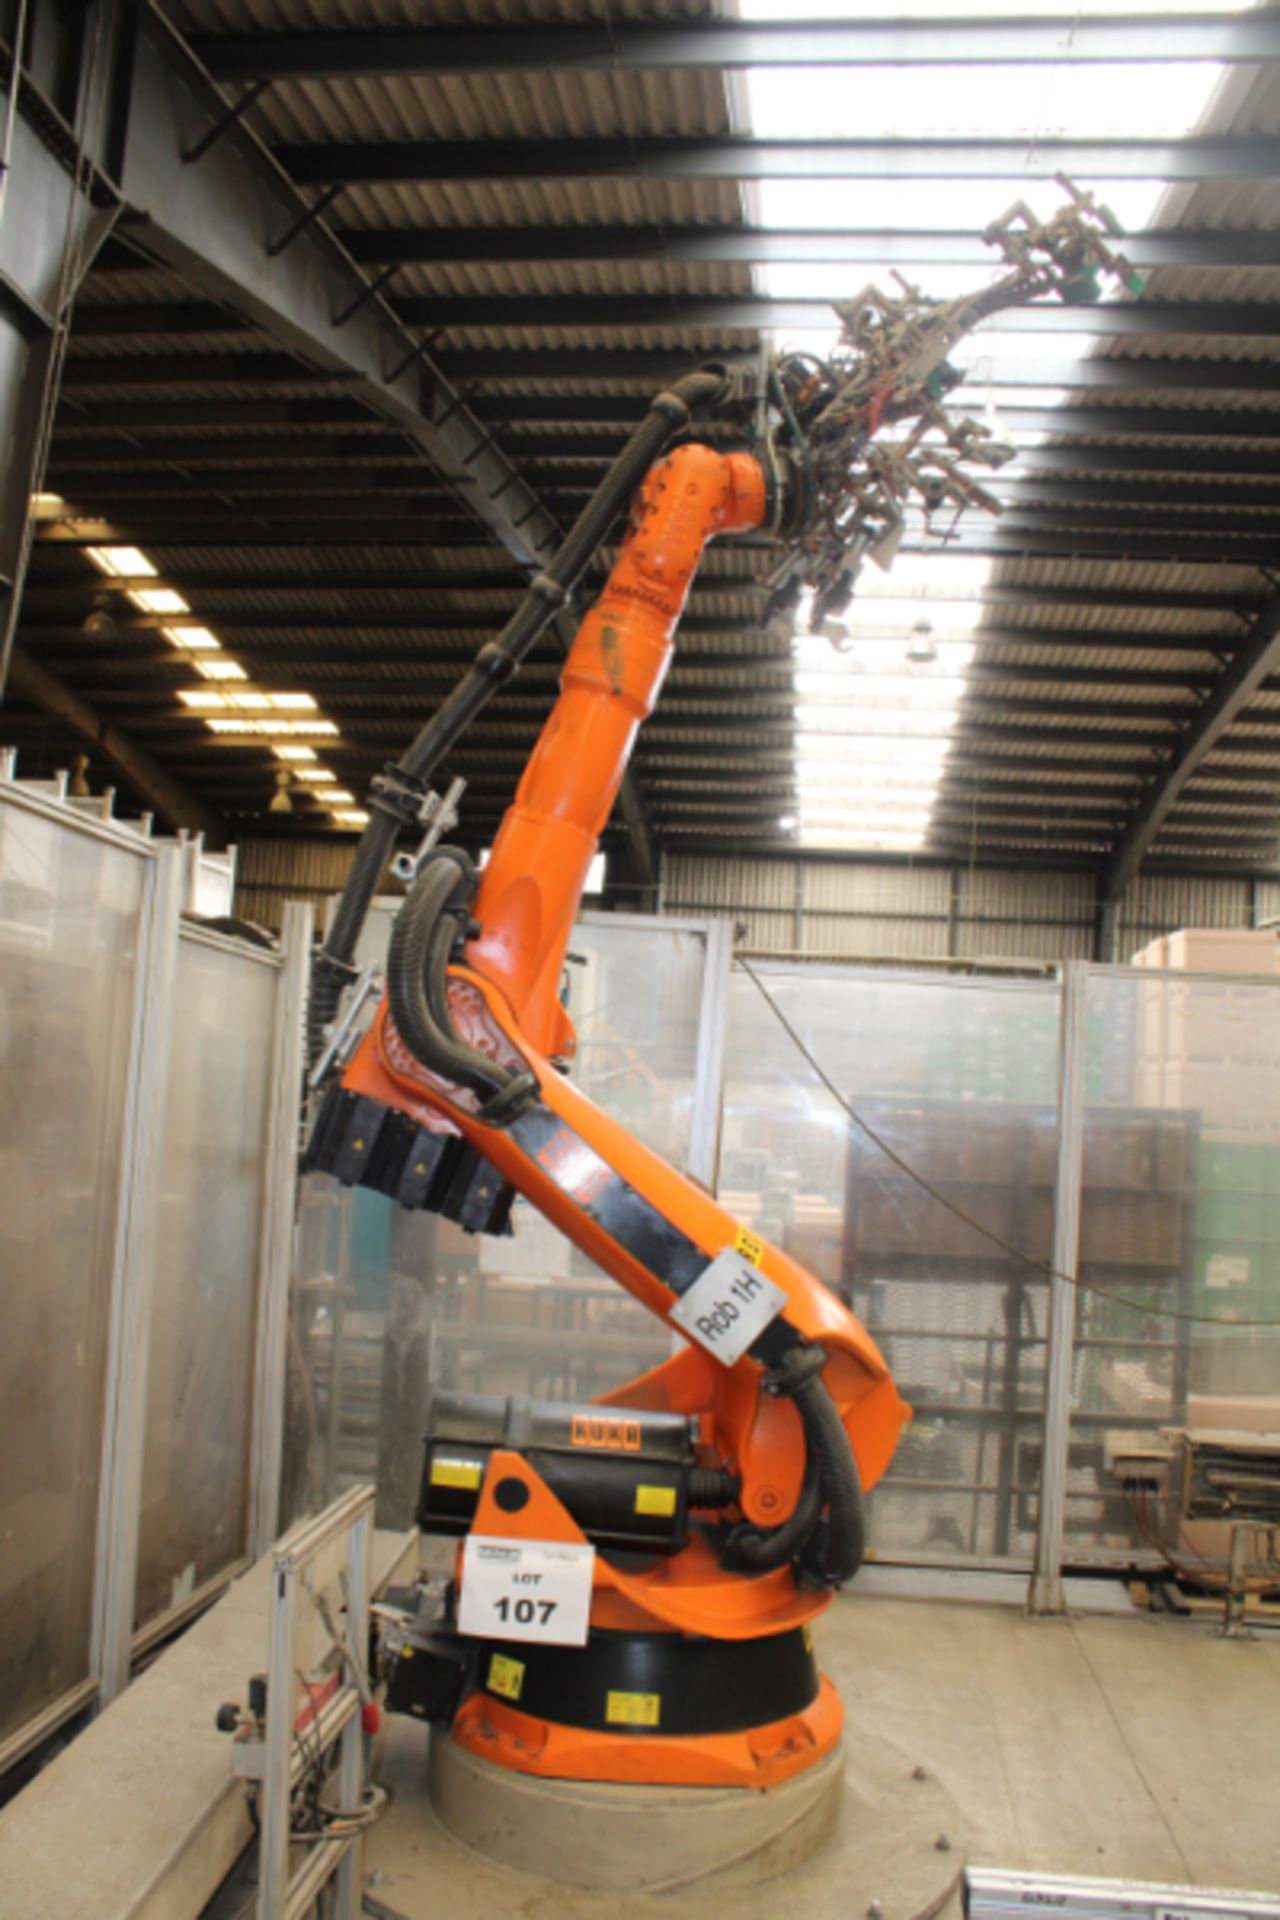 Kuka KR210L150 Robot, Maximum Reach: 3,100 mm, Rated Payload: 150 Kg, Robot Controller, New 2003 - Image 3 of 4